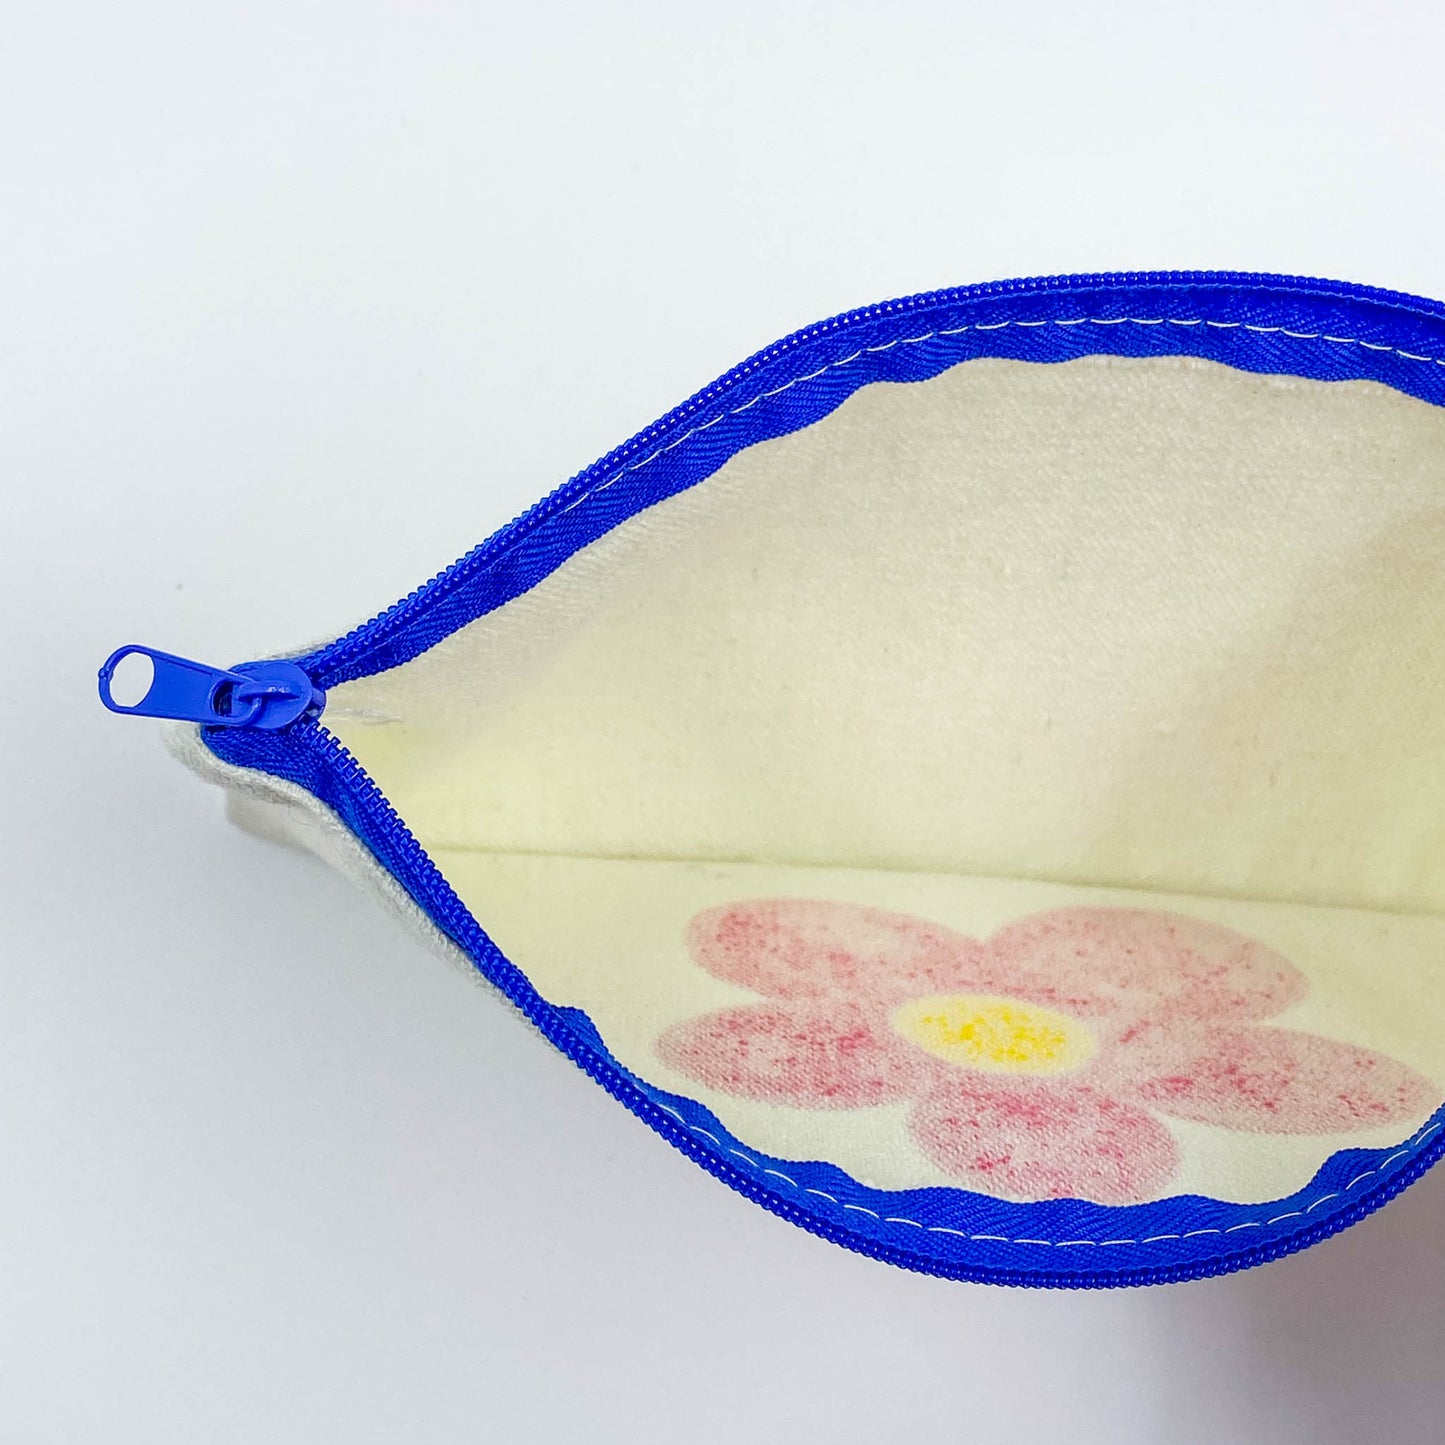 Hand-Painted Zippered Pouch